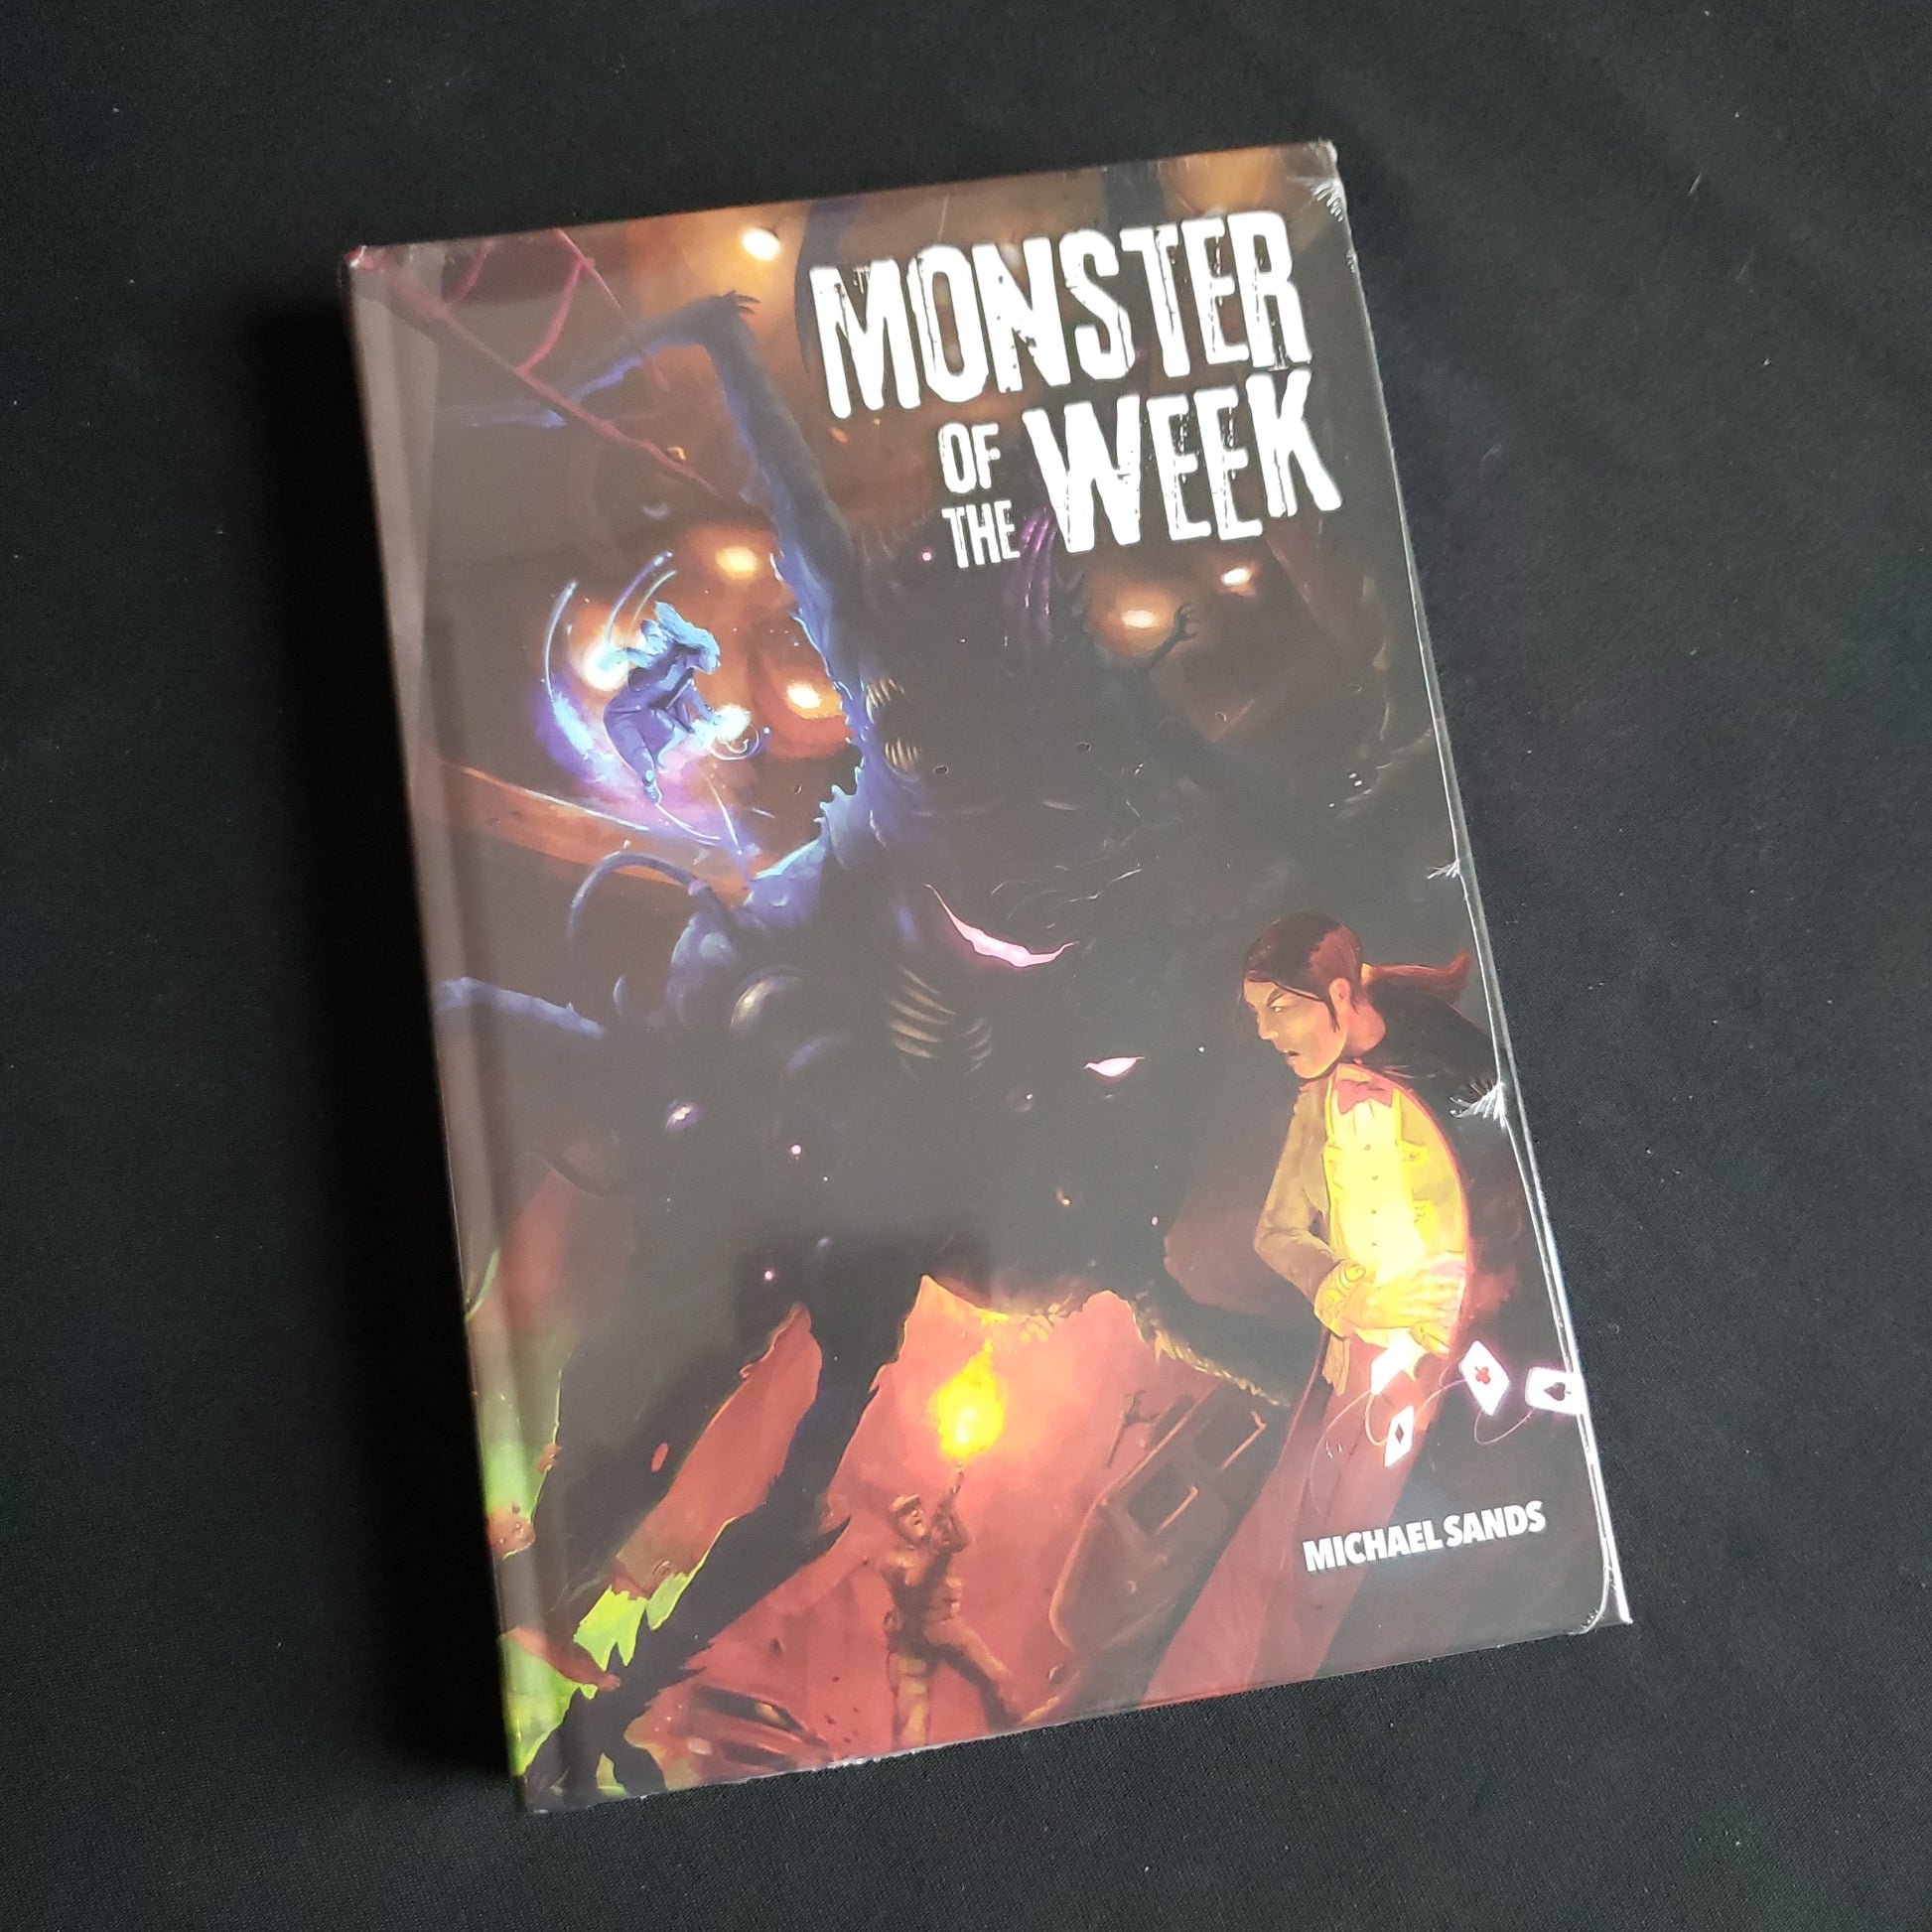 Image shows the front cover of the hardcover edition of the Monster of the Week roleplaying game book